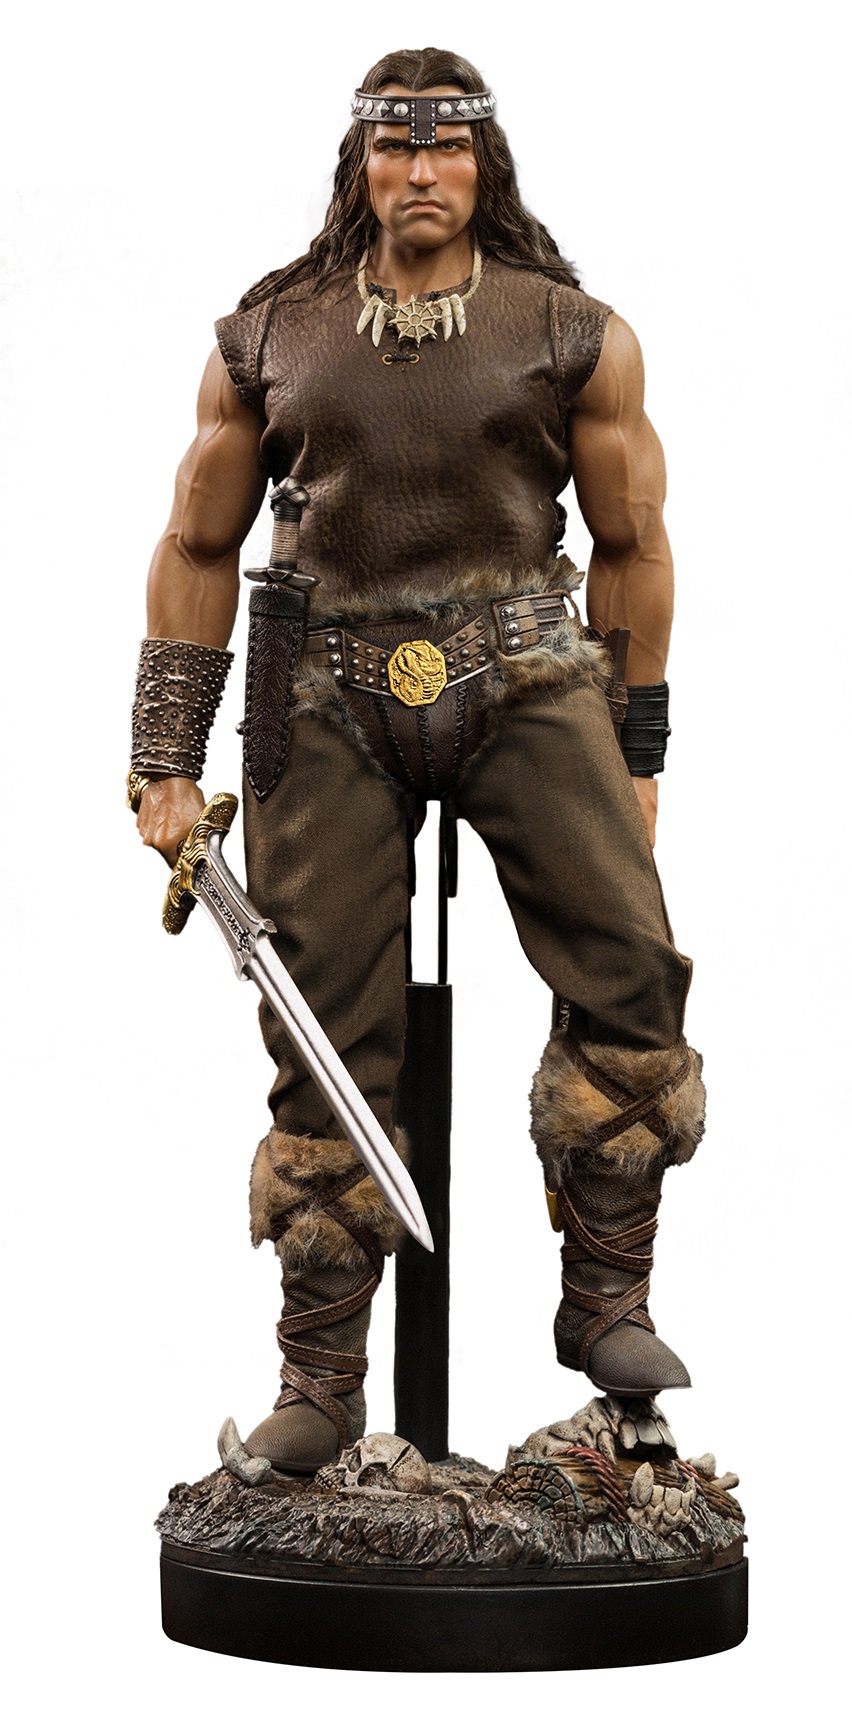 newproduct - NEW PRODUCT: Haoyutoys: HH18064 1/6 Scale The Barbarian 18003410